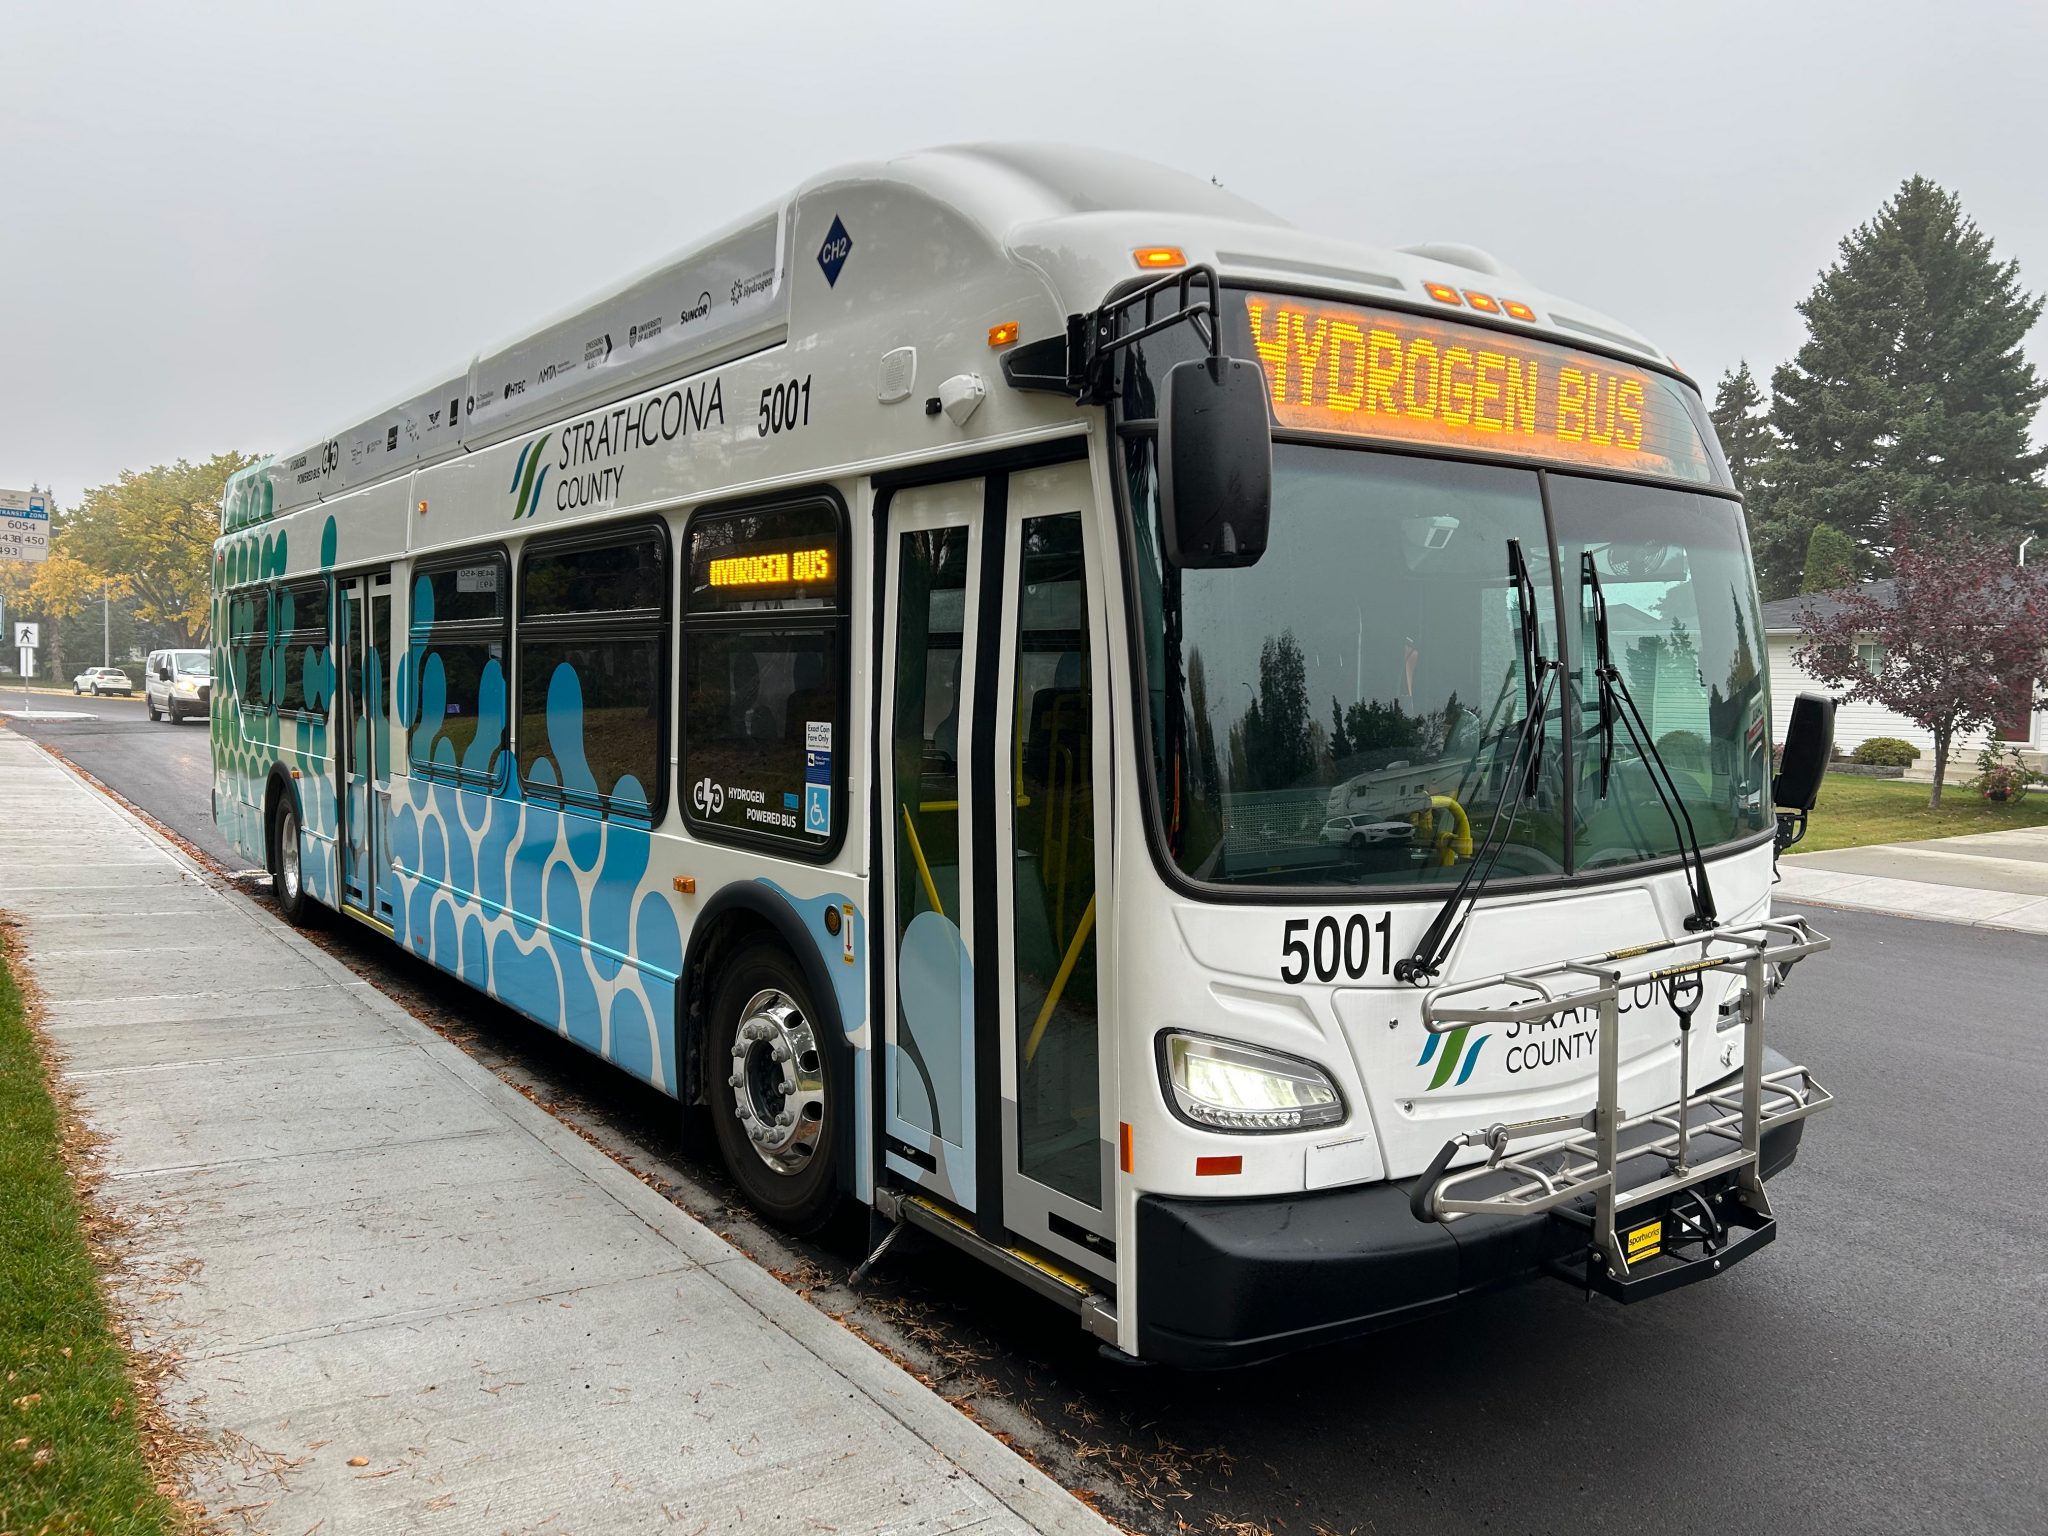 Hydrogen bus from Strathcona County